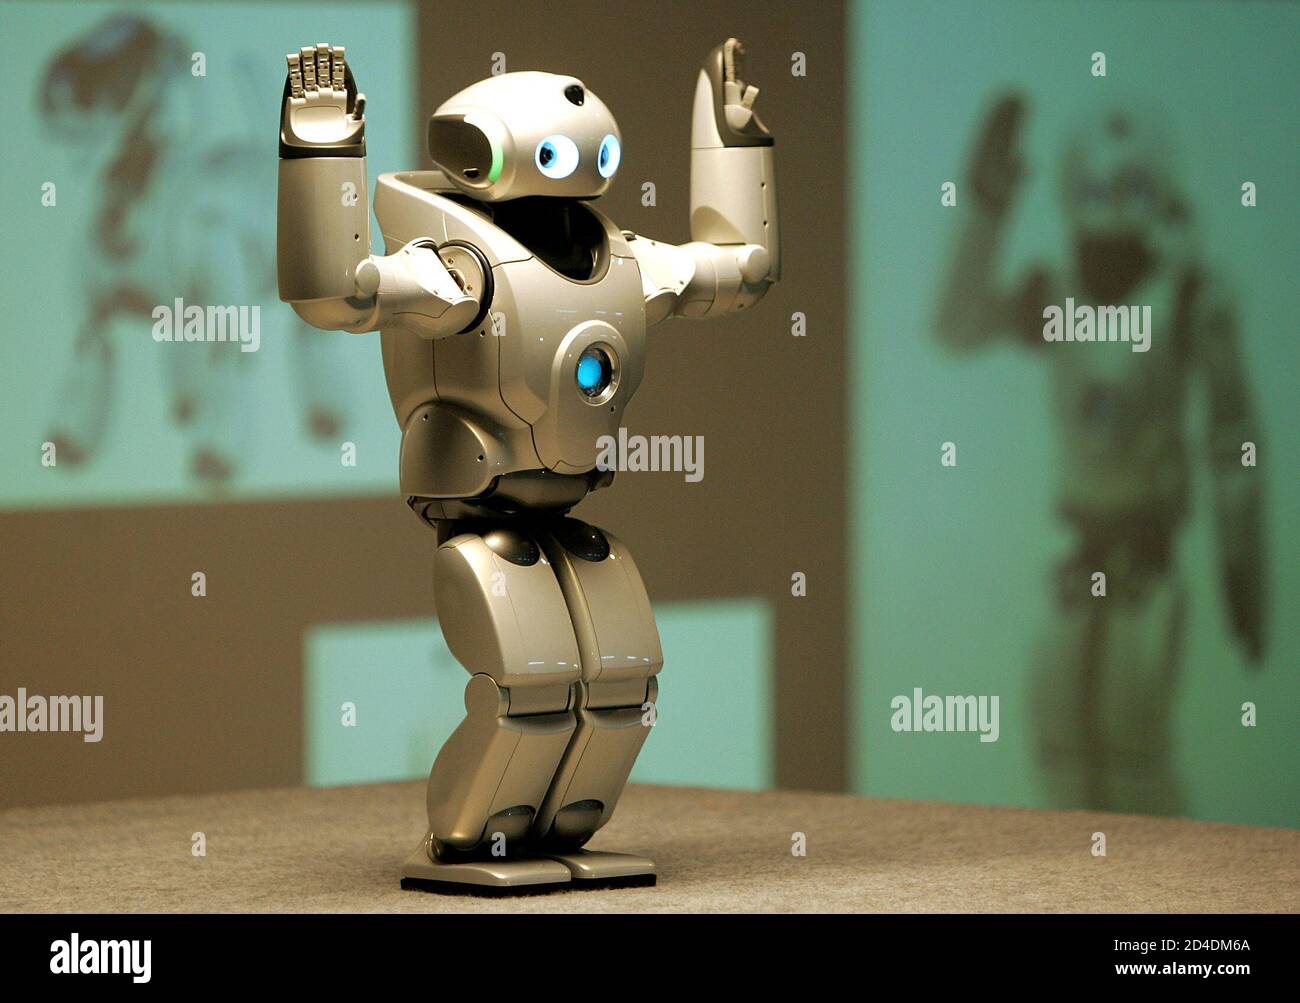 The QRIO, Sony Corp's small bipedal entertainment robot performs a dance  during a demonstration in a school in New Delhi October 26, 2004. QRIO has  been appointed by NFUAJ as the science